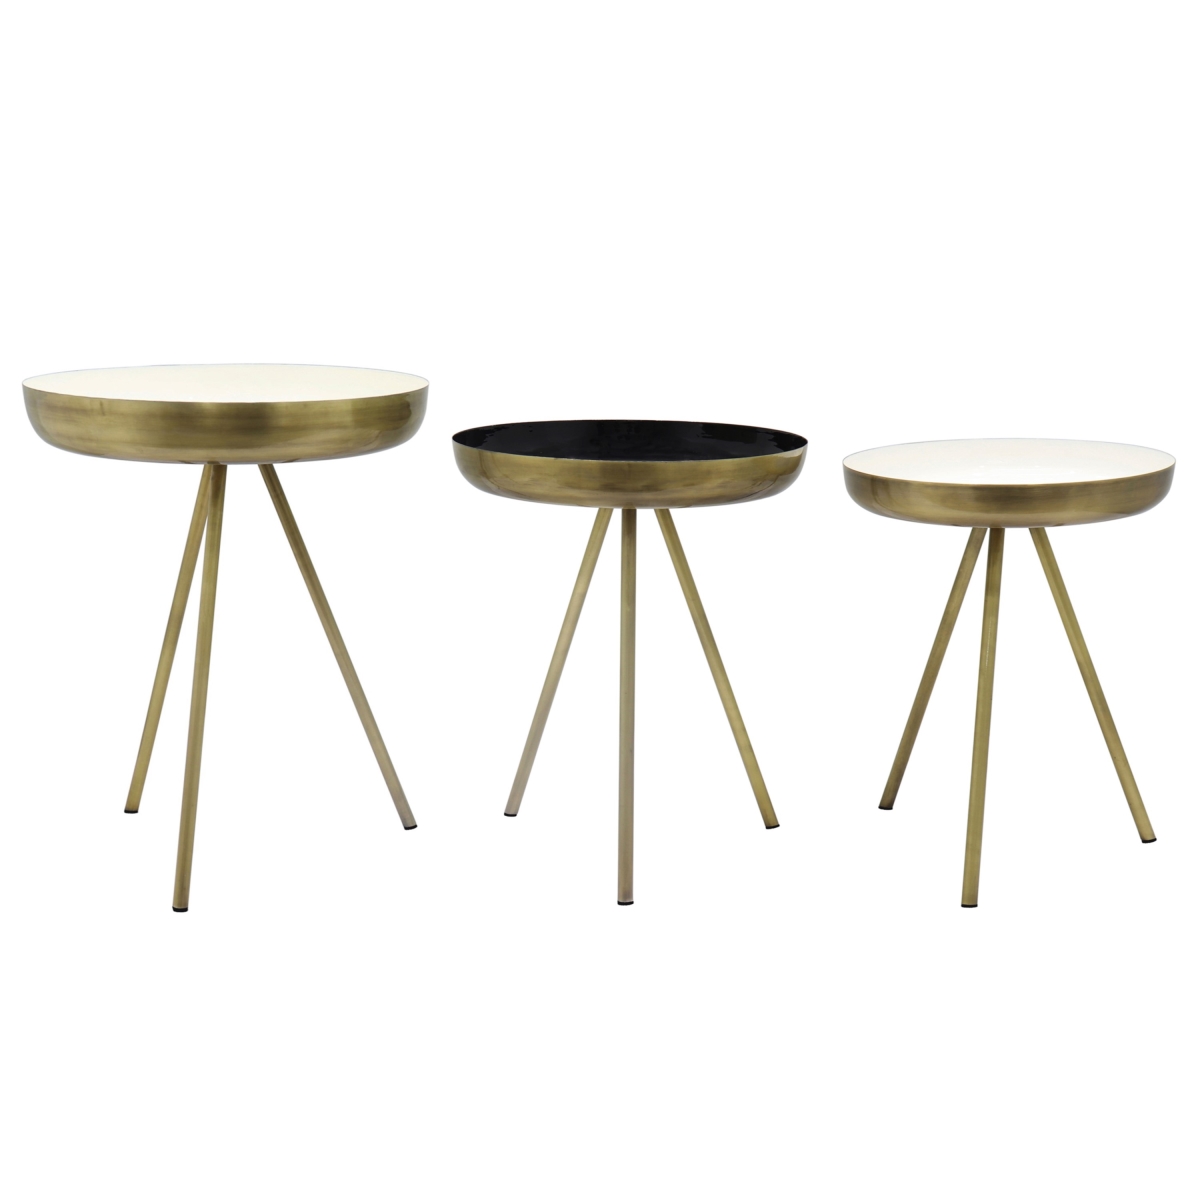 1260008 20.5 X 20.5 X 25 In. Dane Side Table - Antique Brass, White & Black - Set Of 3